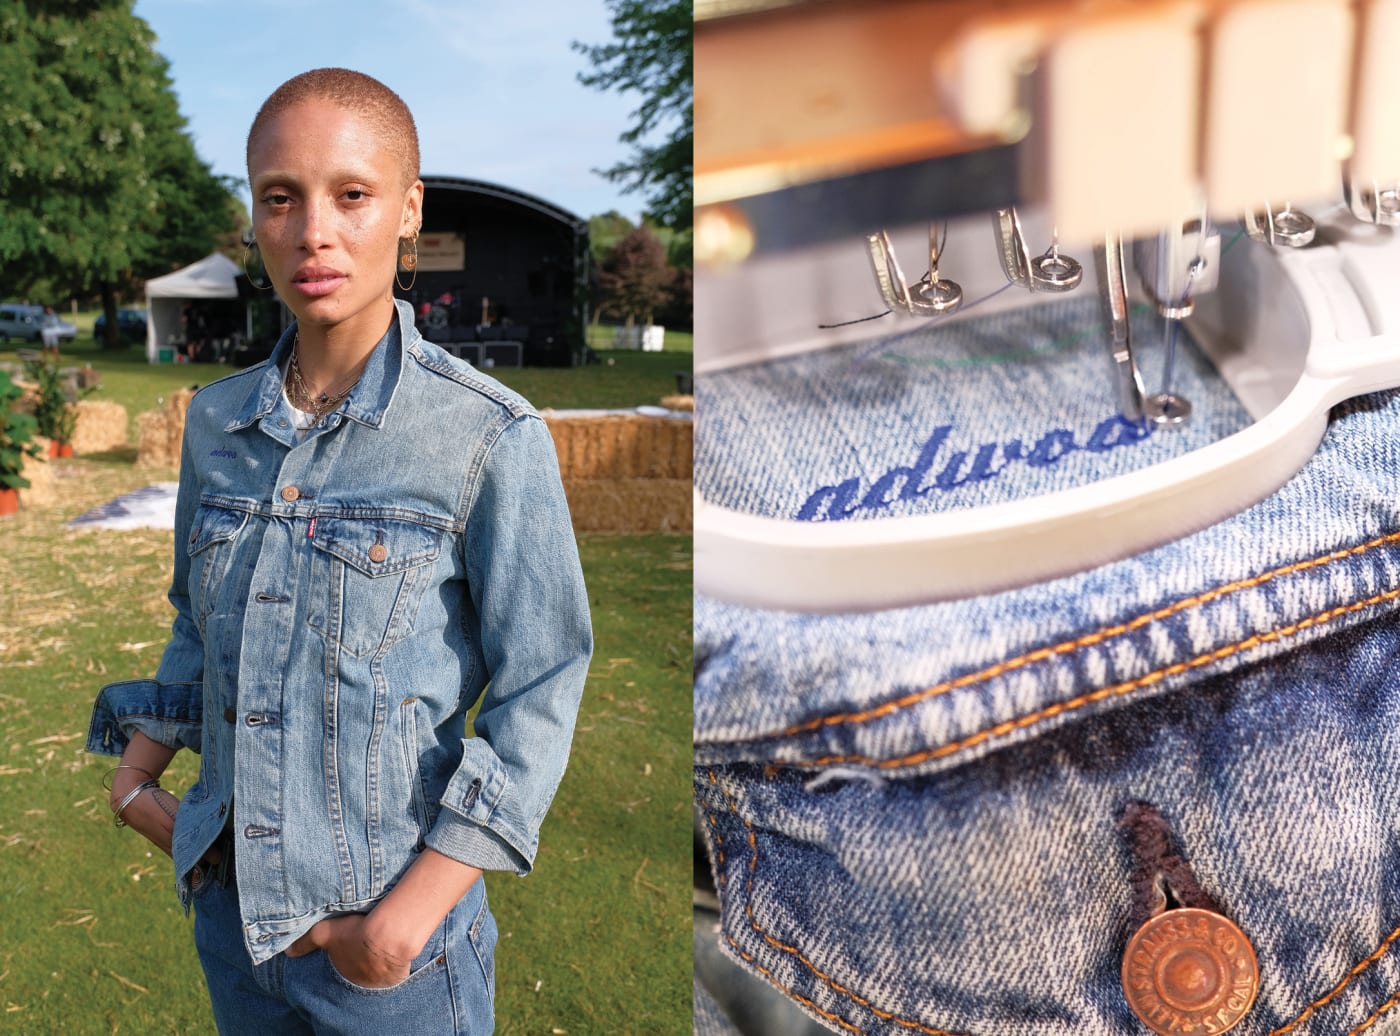 The Levi's Tailor Shop Kick off Festival Season with Party Hosted by Adwoa  Aboah | Complex UK